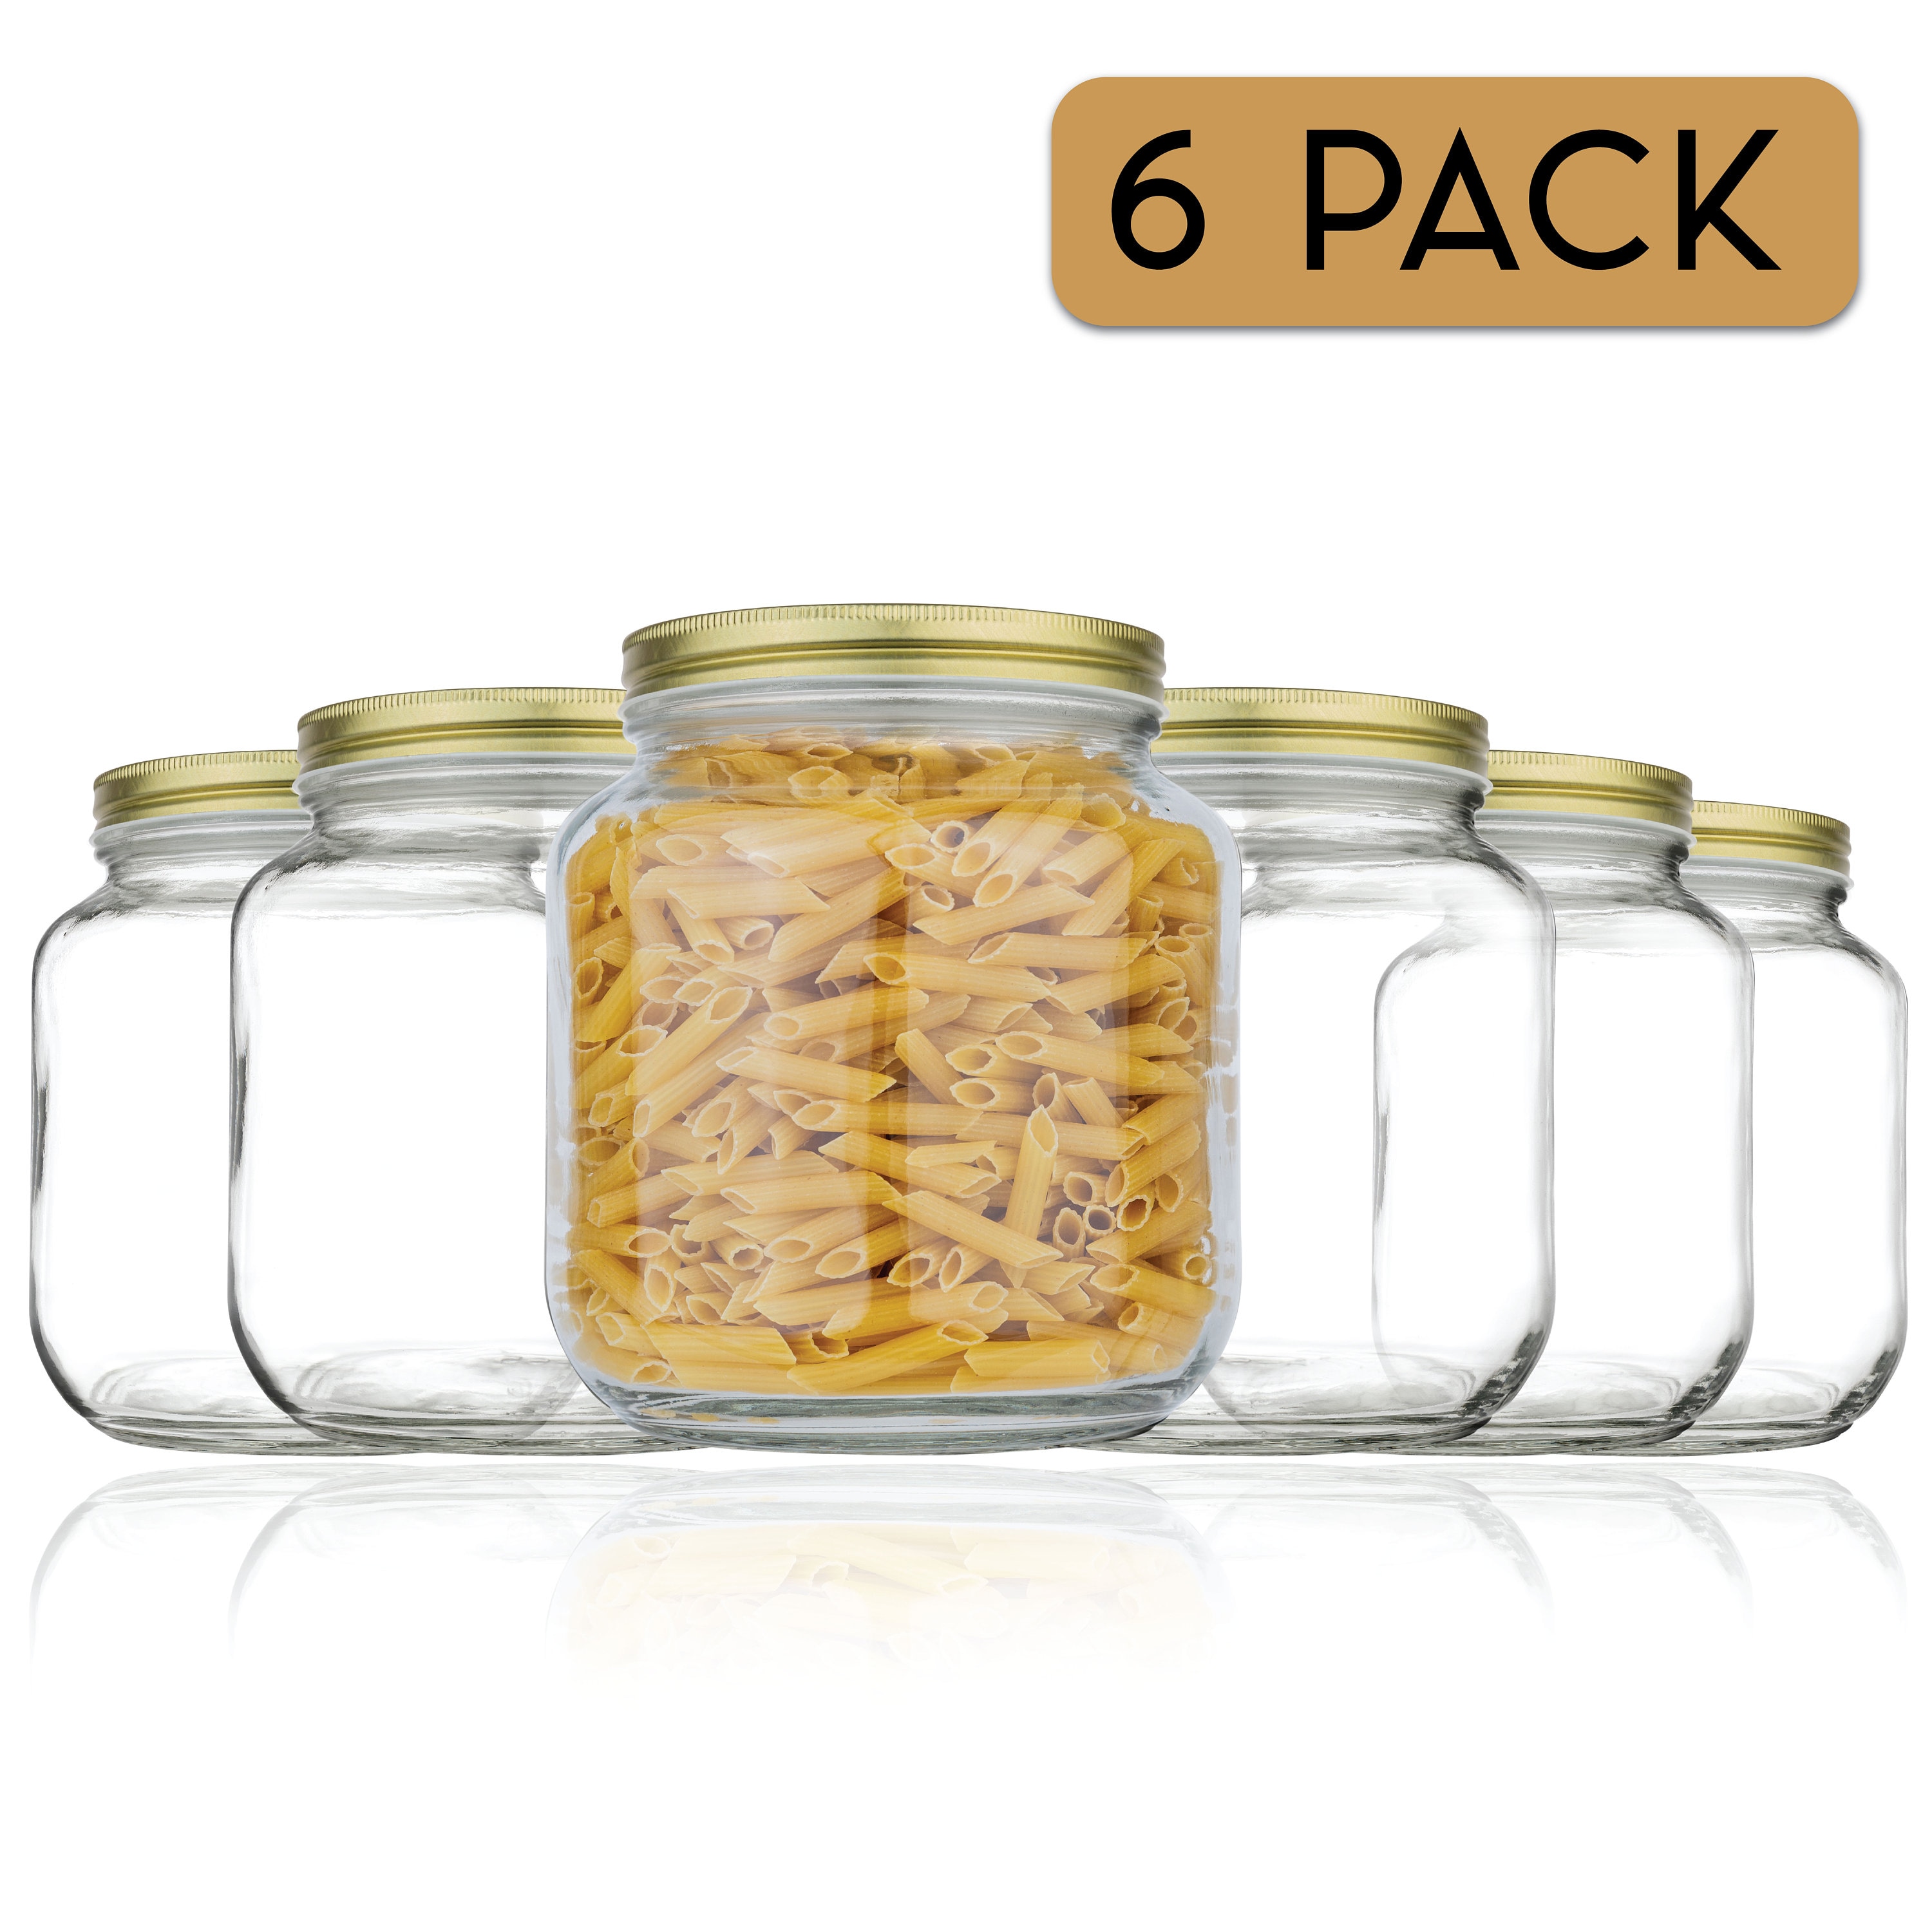 Multi-Purpose Large Mason Jar with Metal Lid for Pickles, Spices, Mason  Jars Wide Mouth with Airtight Lids for Canning, Fermenting 